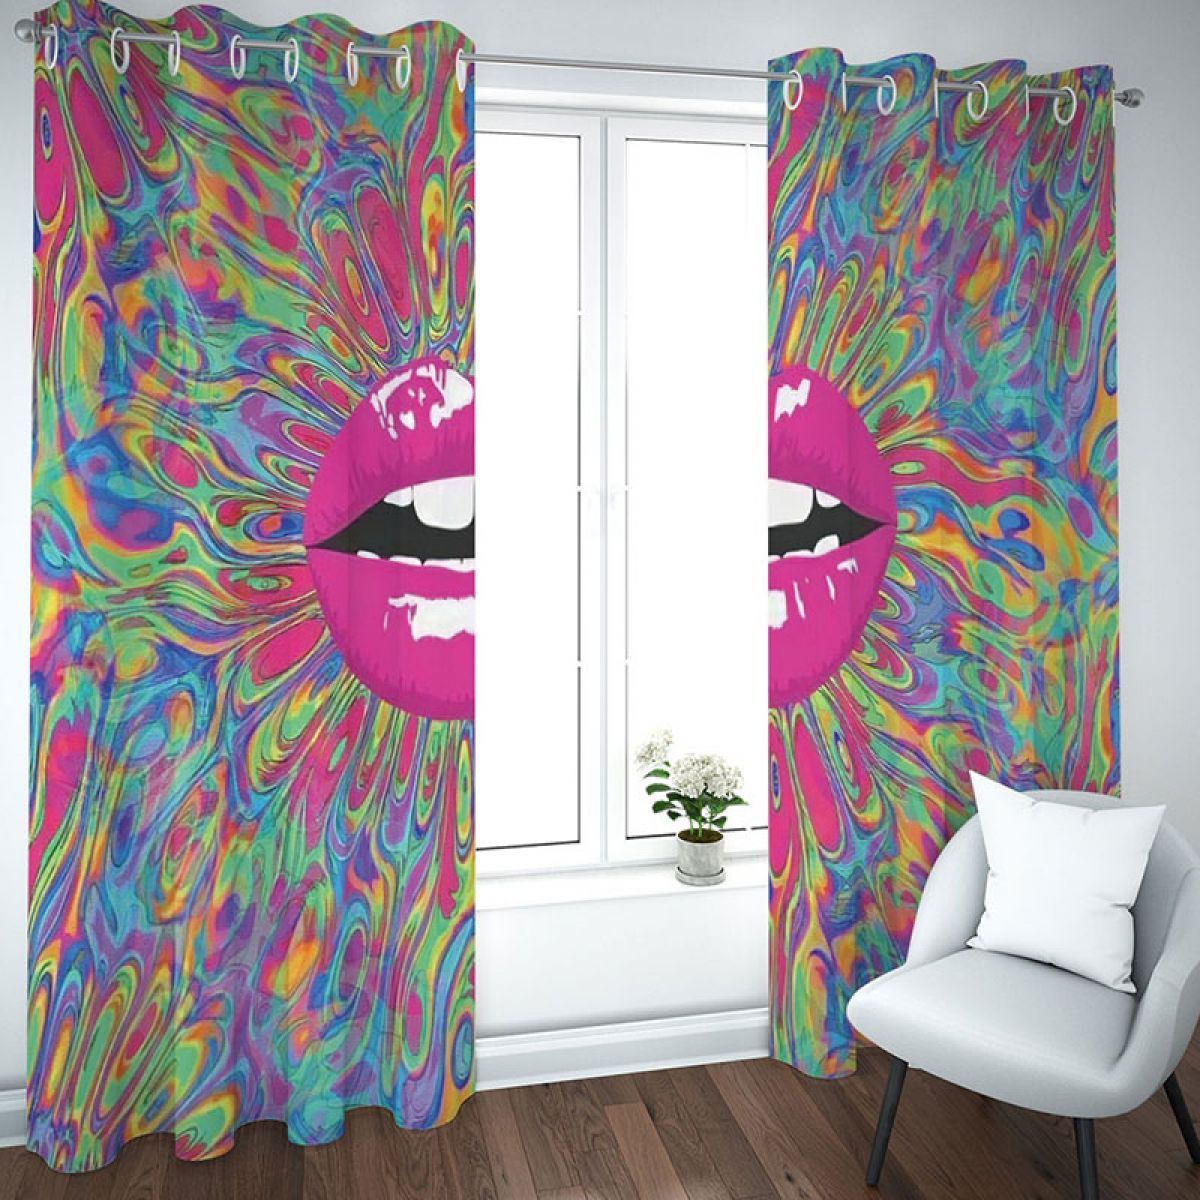 Lipstick Mouth Watercolor Printed Window Curtain Home Decor